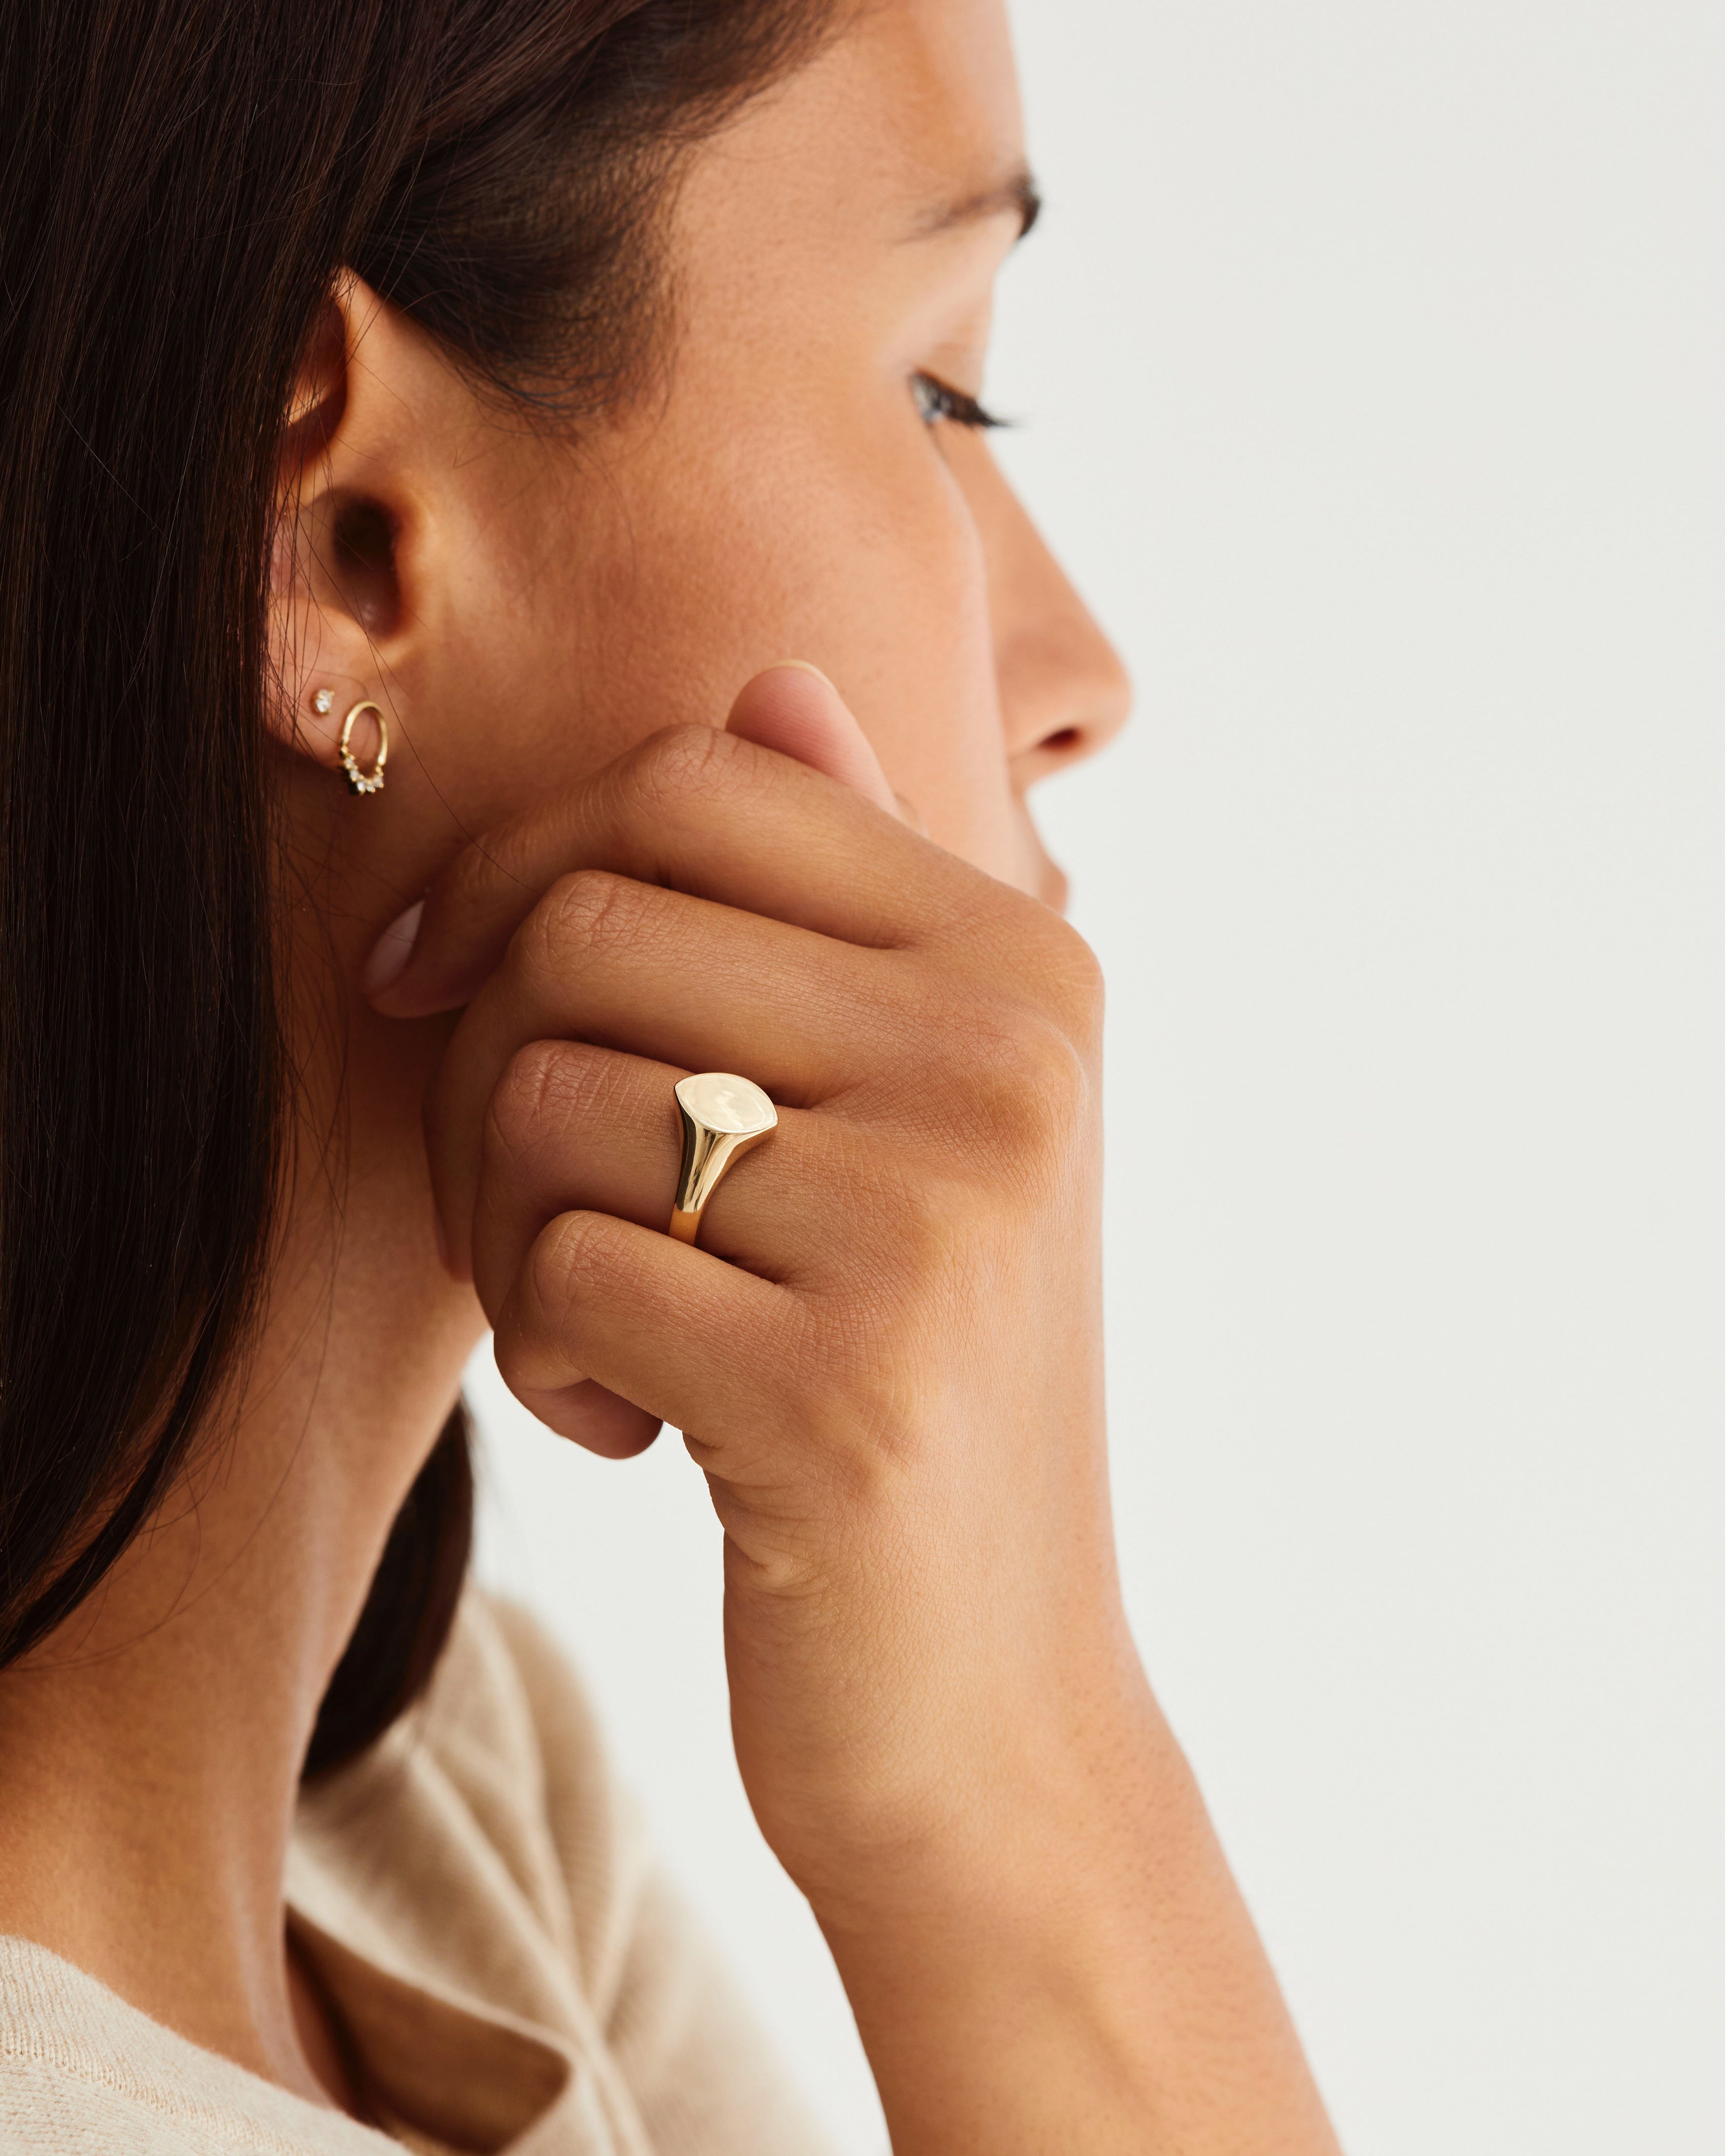 A woman's hand adorned with the Willow Signet Ring in yellow gold.